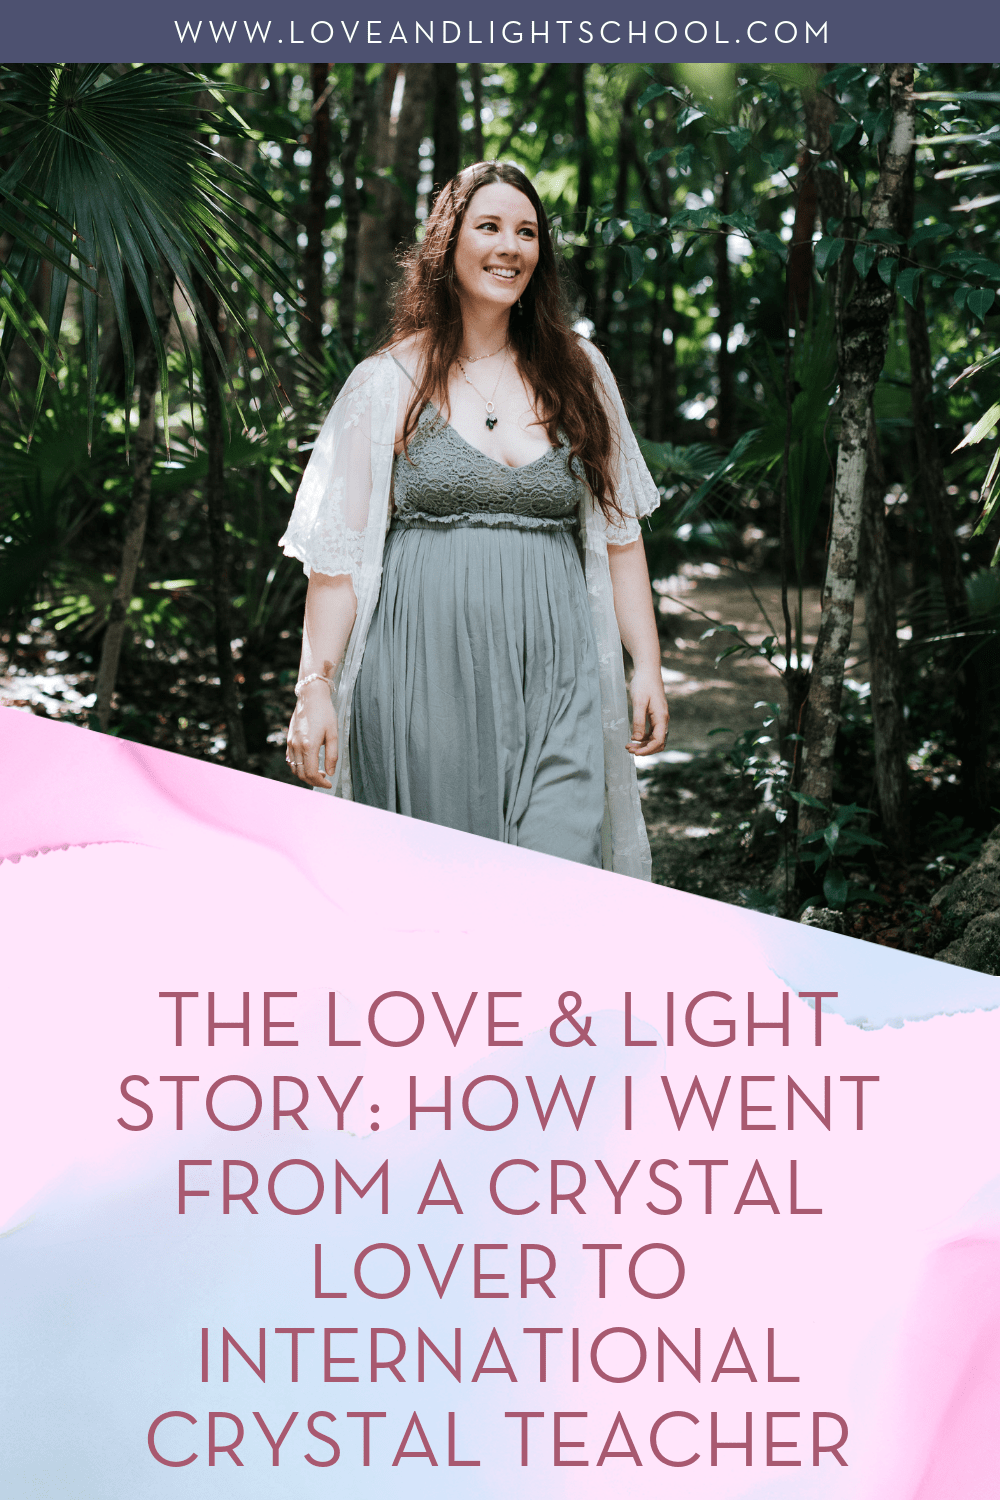 How I Went from a Crystal Lover to International Crystal Teacher